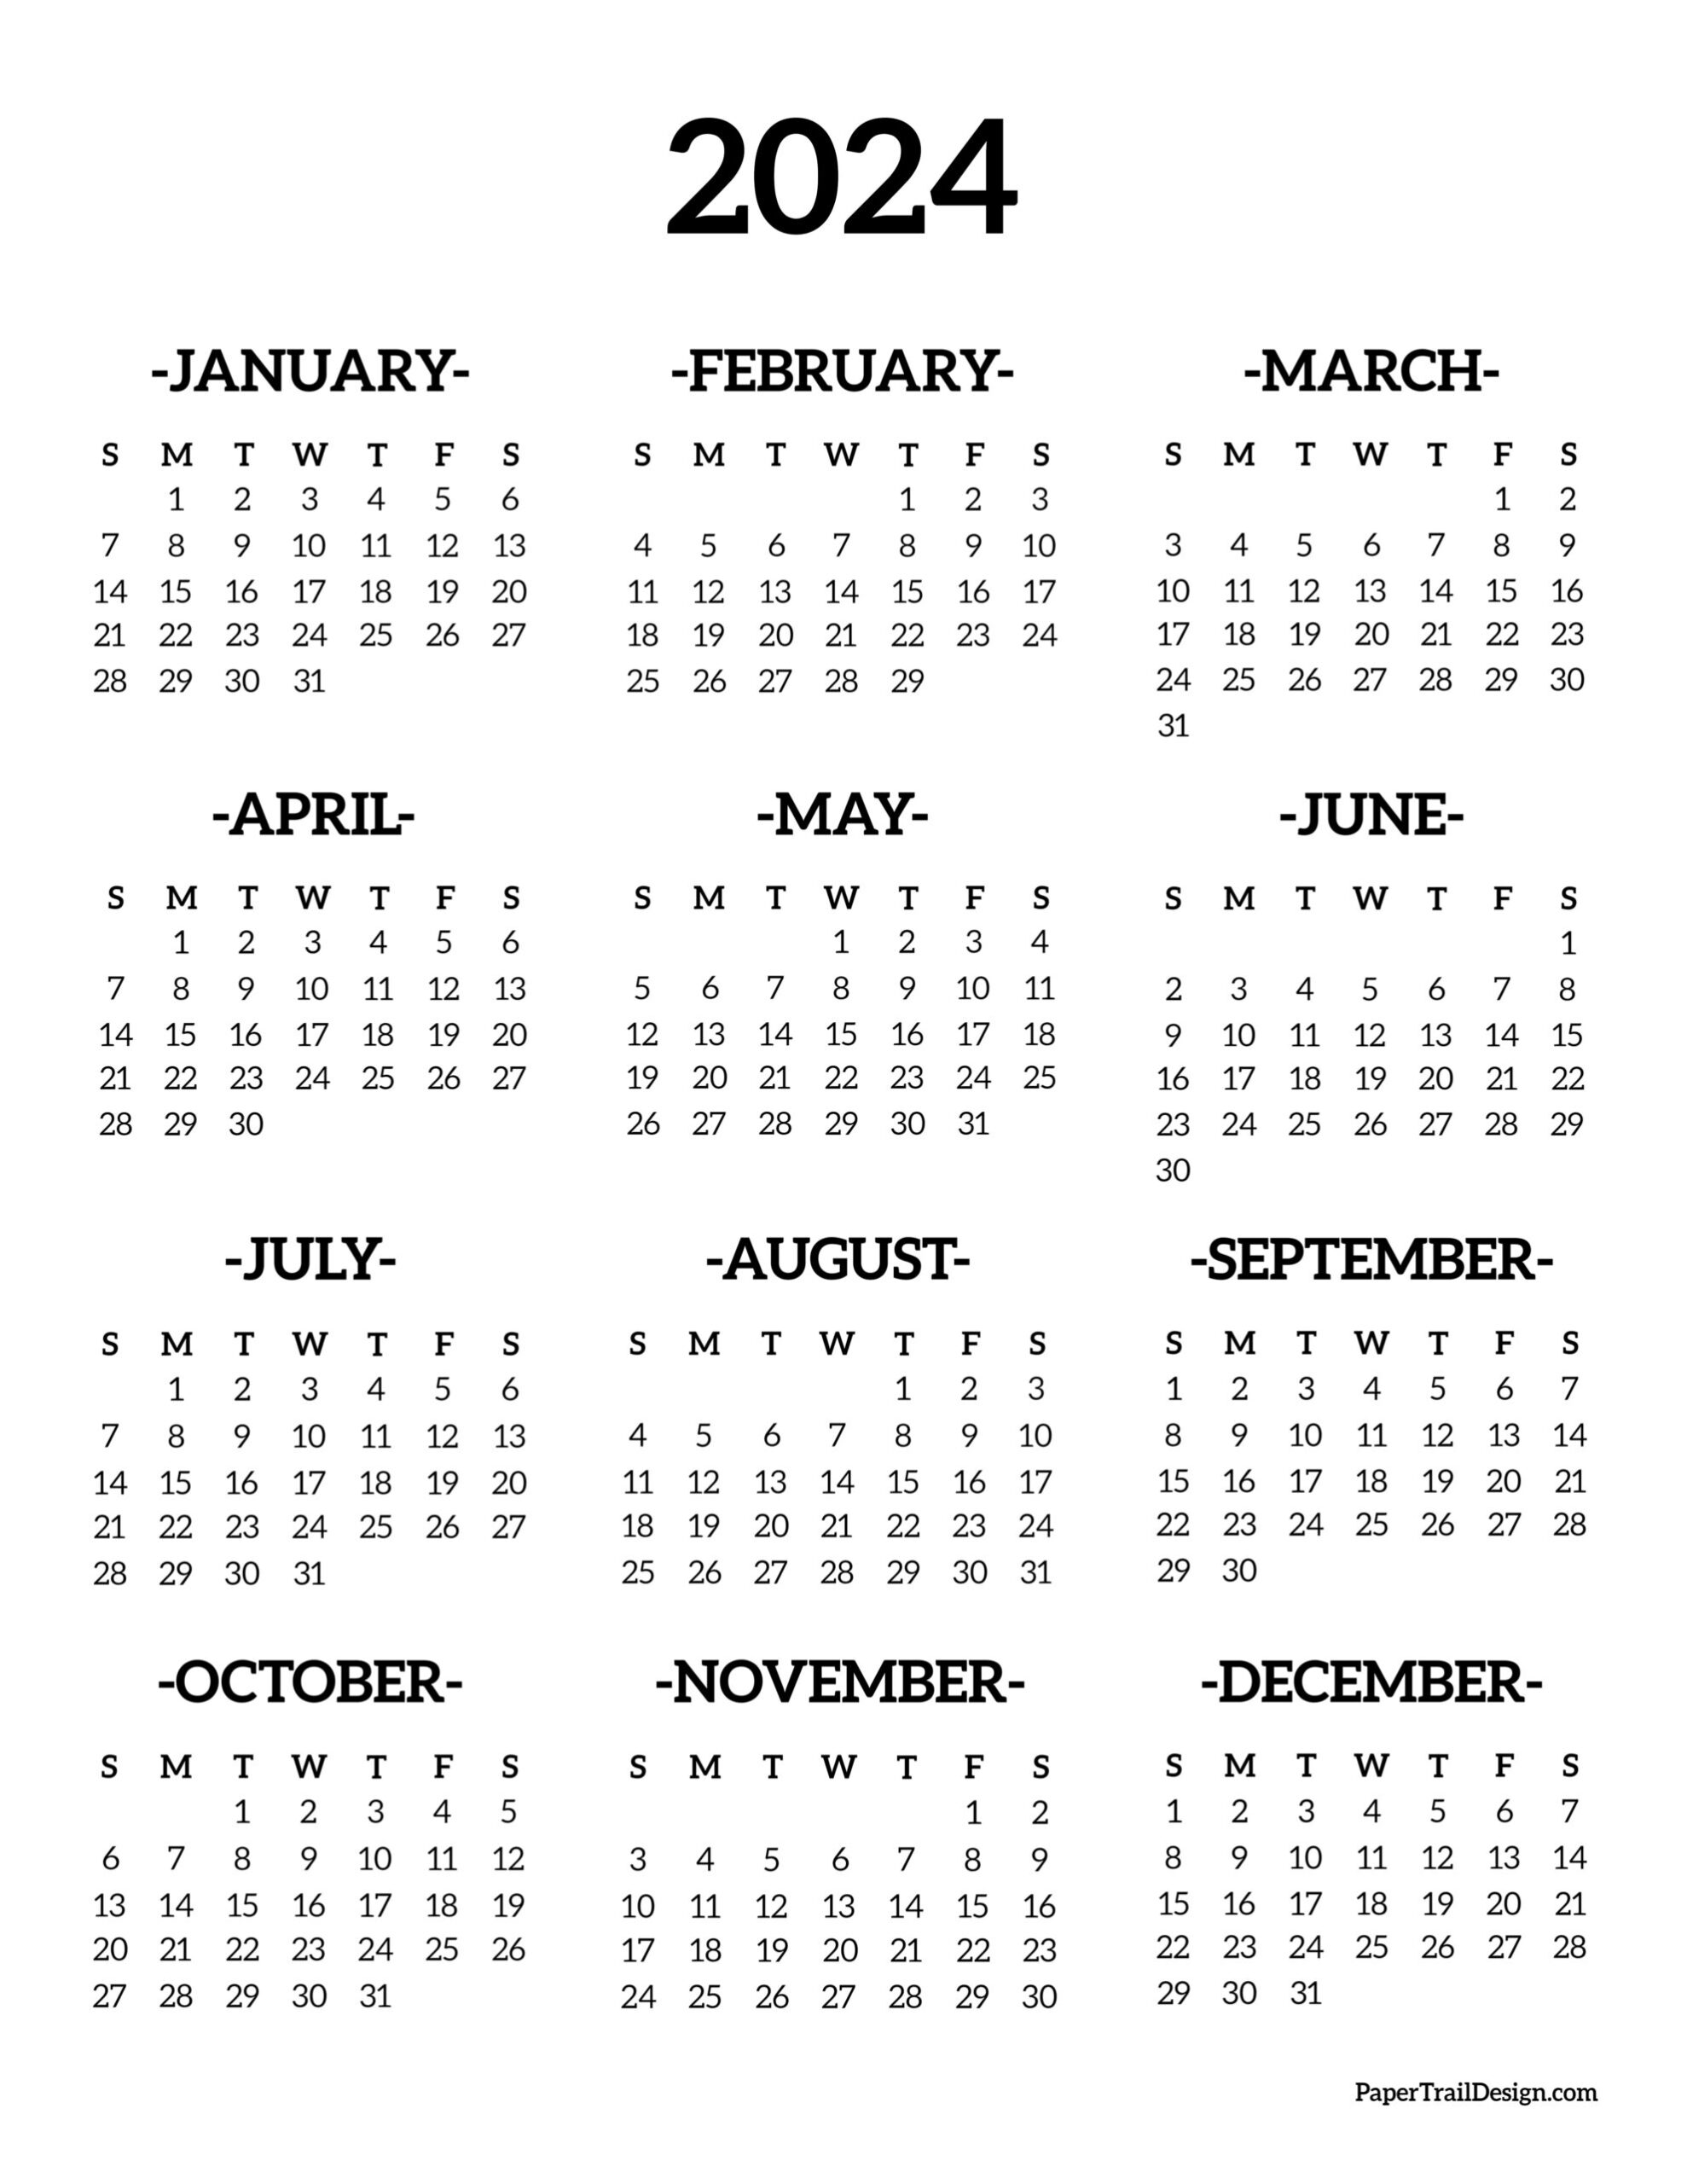 Calendar 2024 Printable One Page - Paper Trail Design for Printable Calendar 2024 And 2024